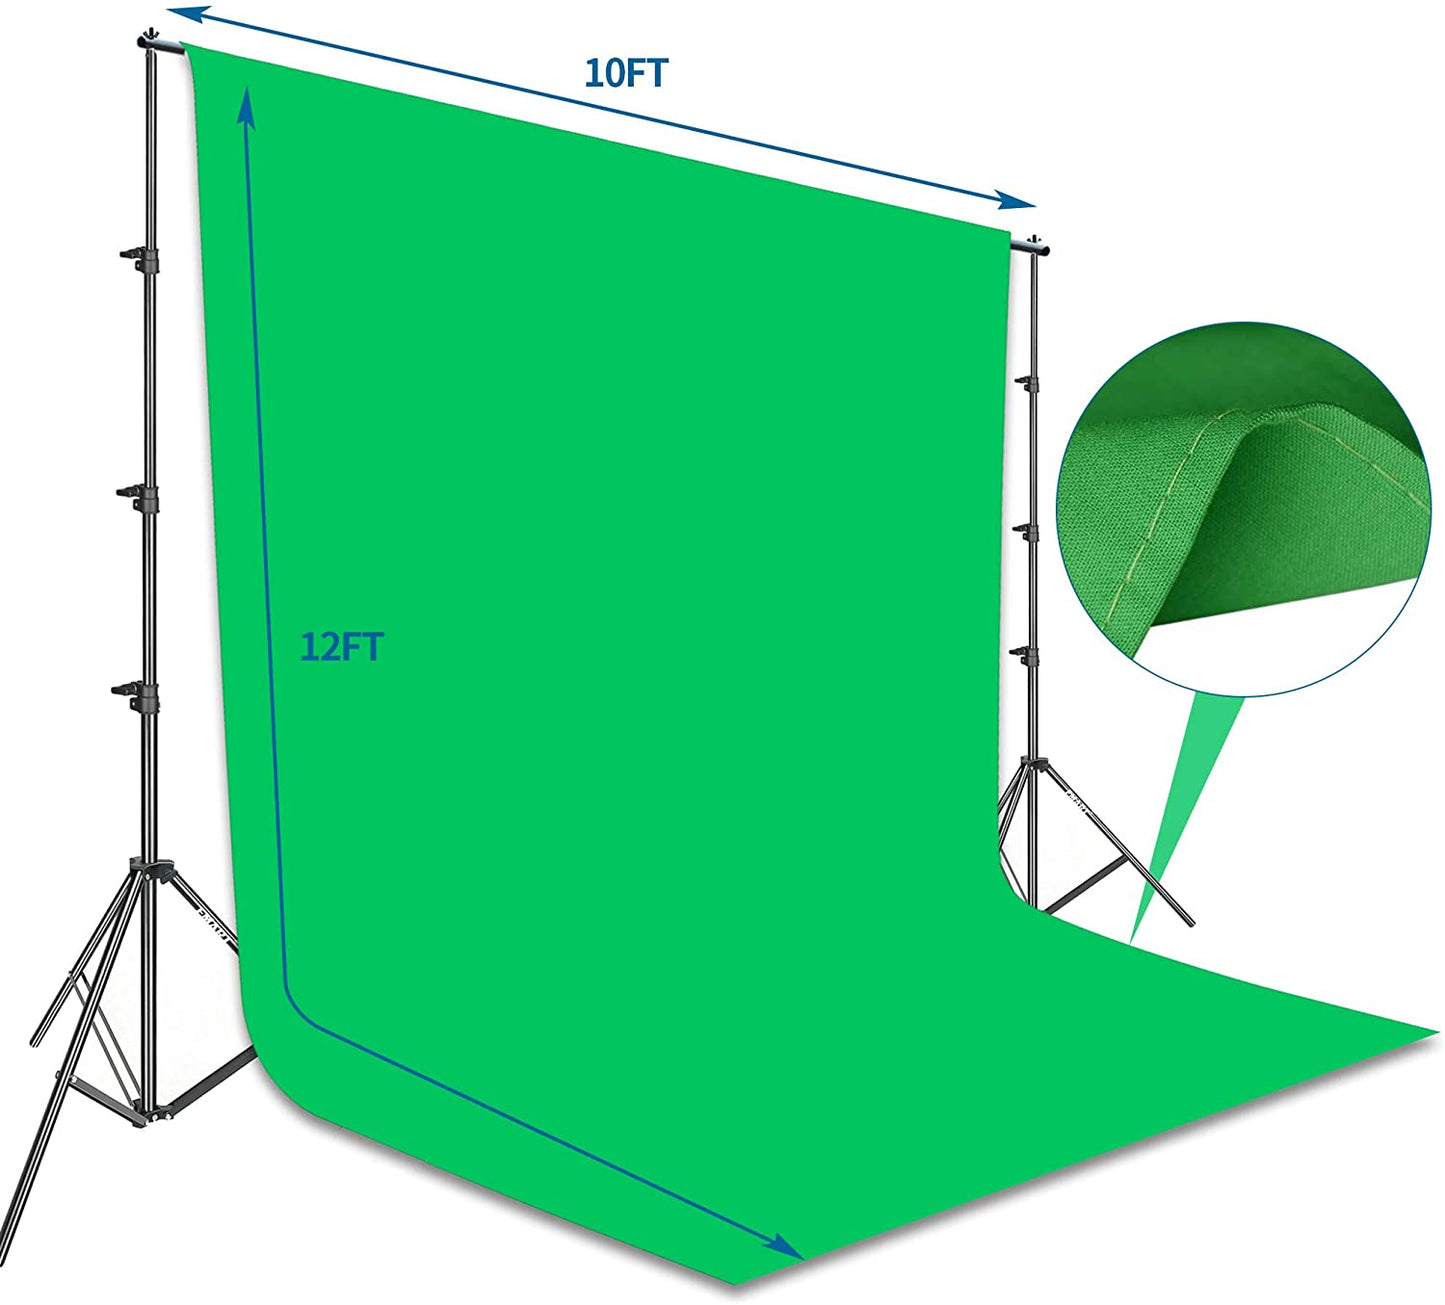 EMART Photo Video Studio 8.5 X 10Ft Green Screen Backdrop Stand Kit, Photography Background Support System with 10 X12Ft 100% Cotton Muslin Chromakey Backdrop